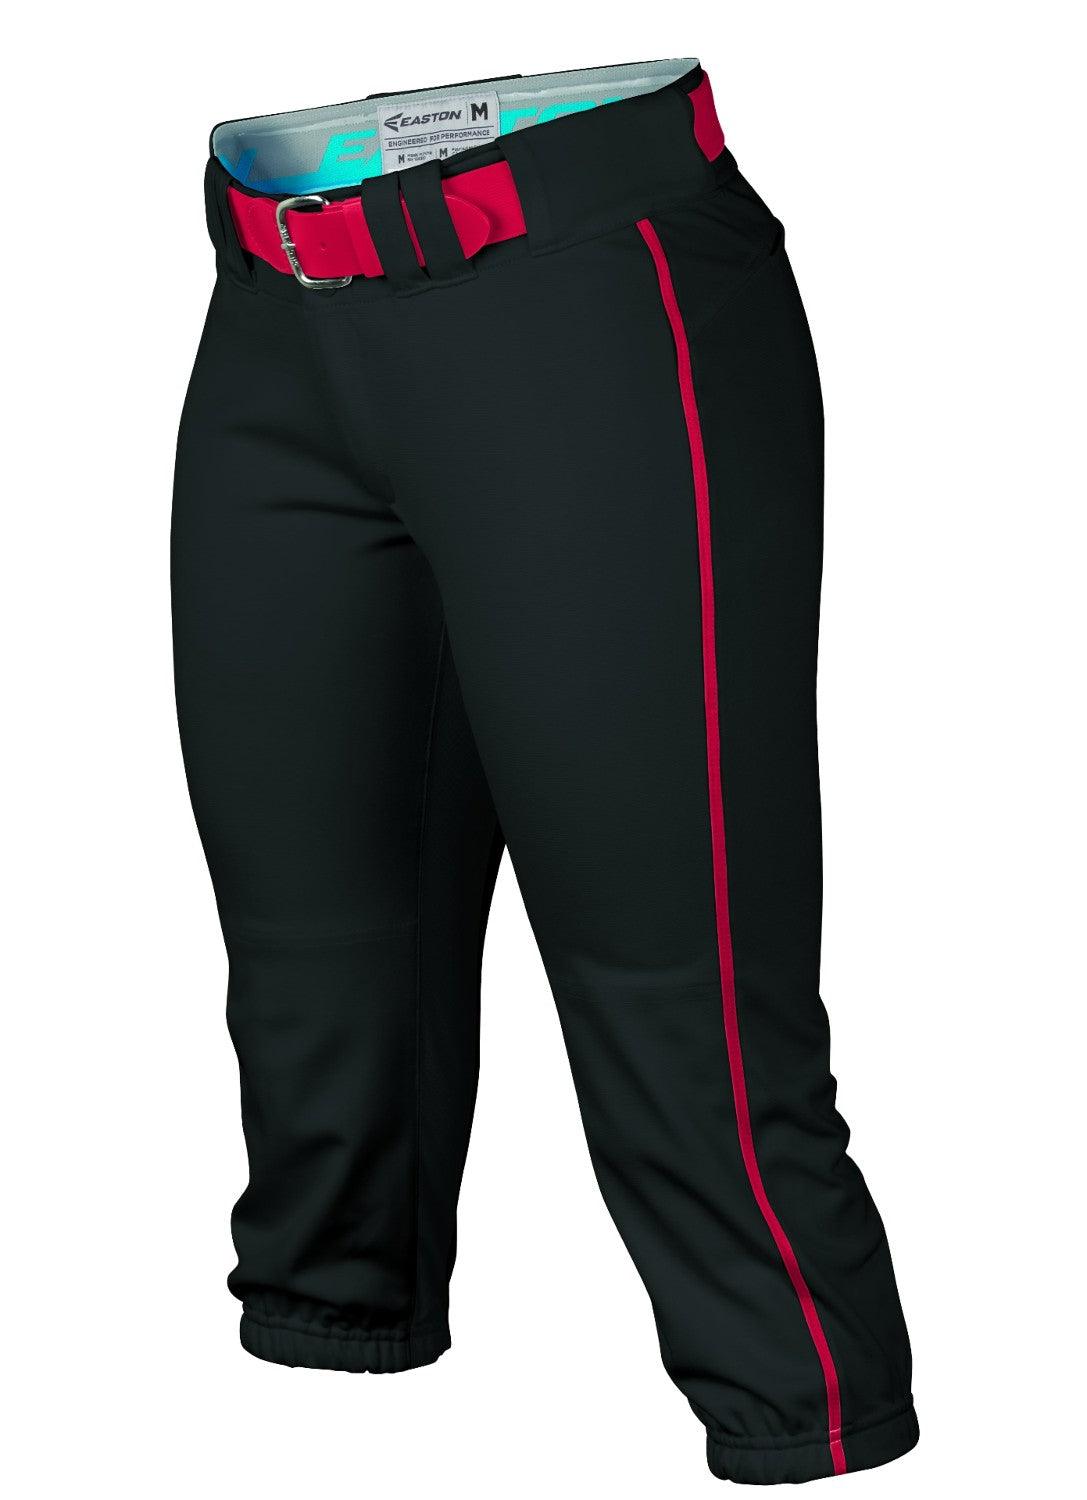 Women's Easton Prowess Piped Softball Pants - Senior - Sports Excellence